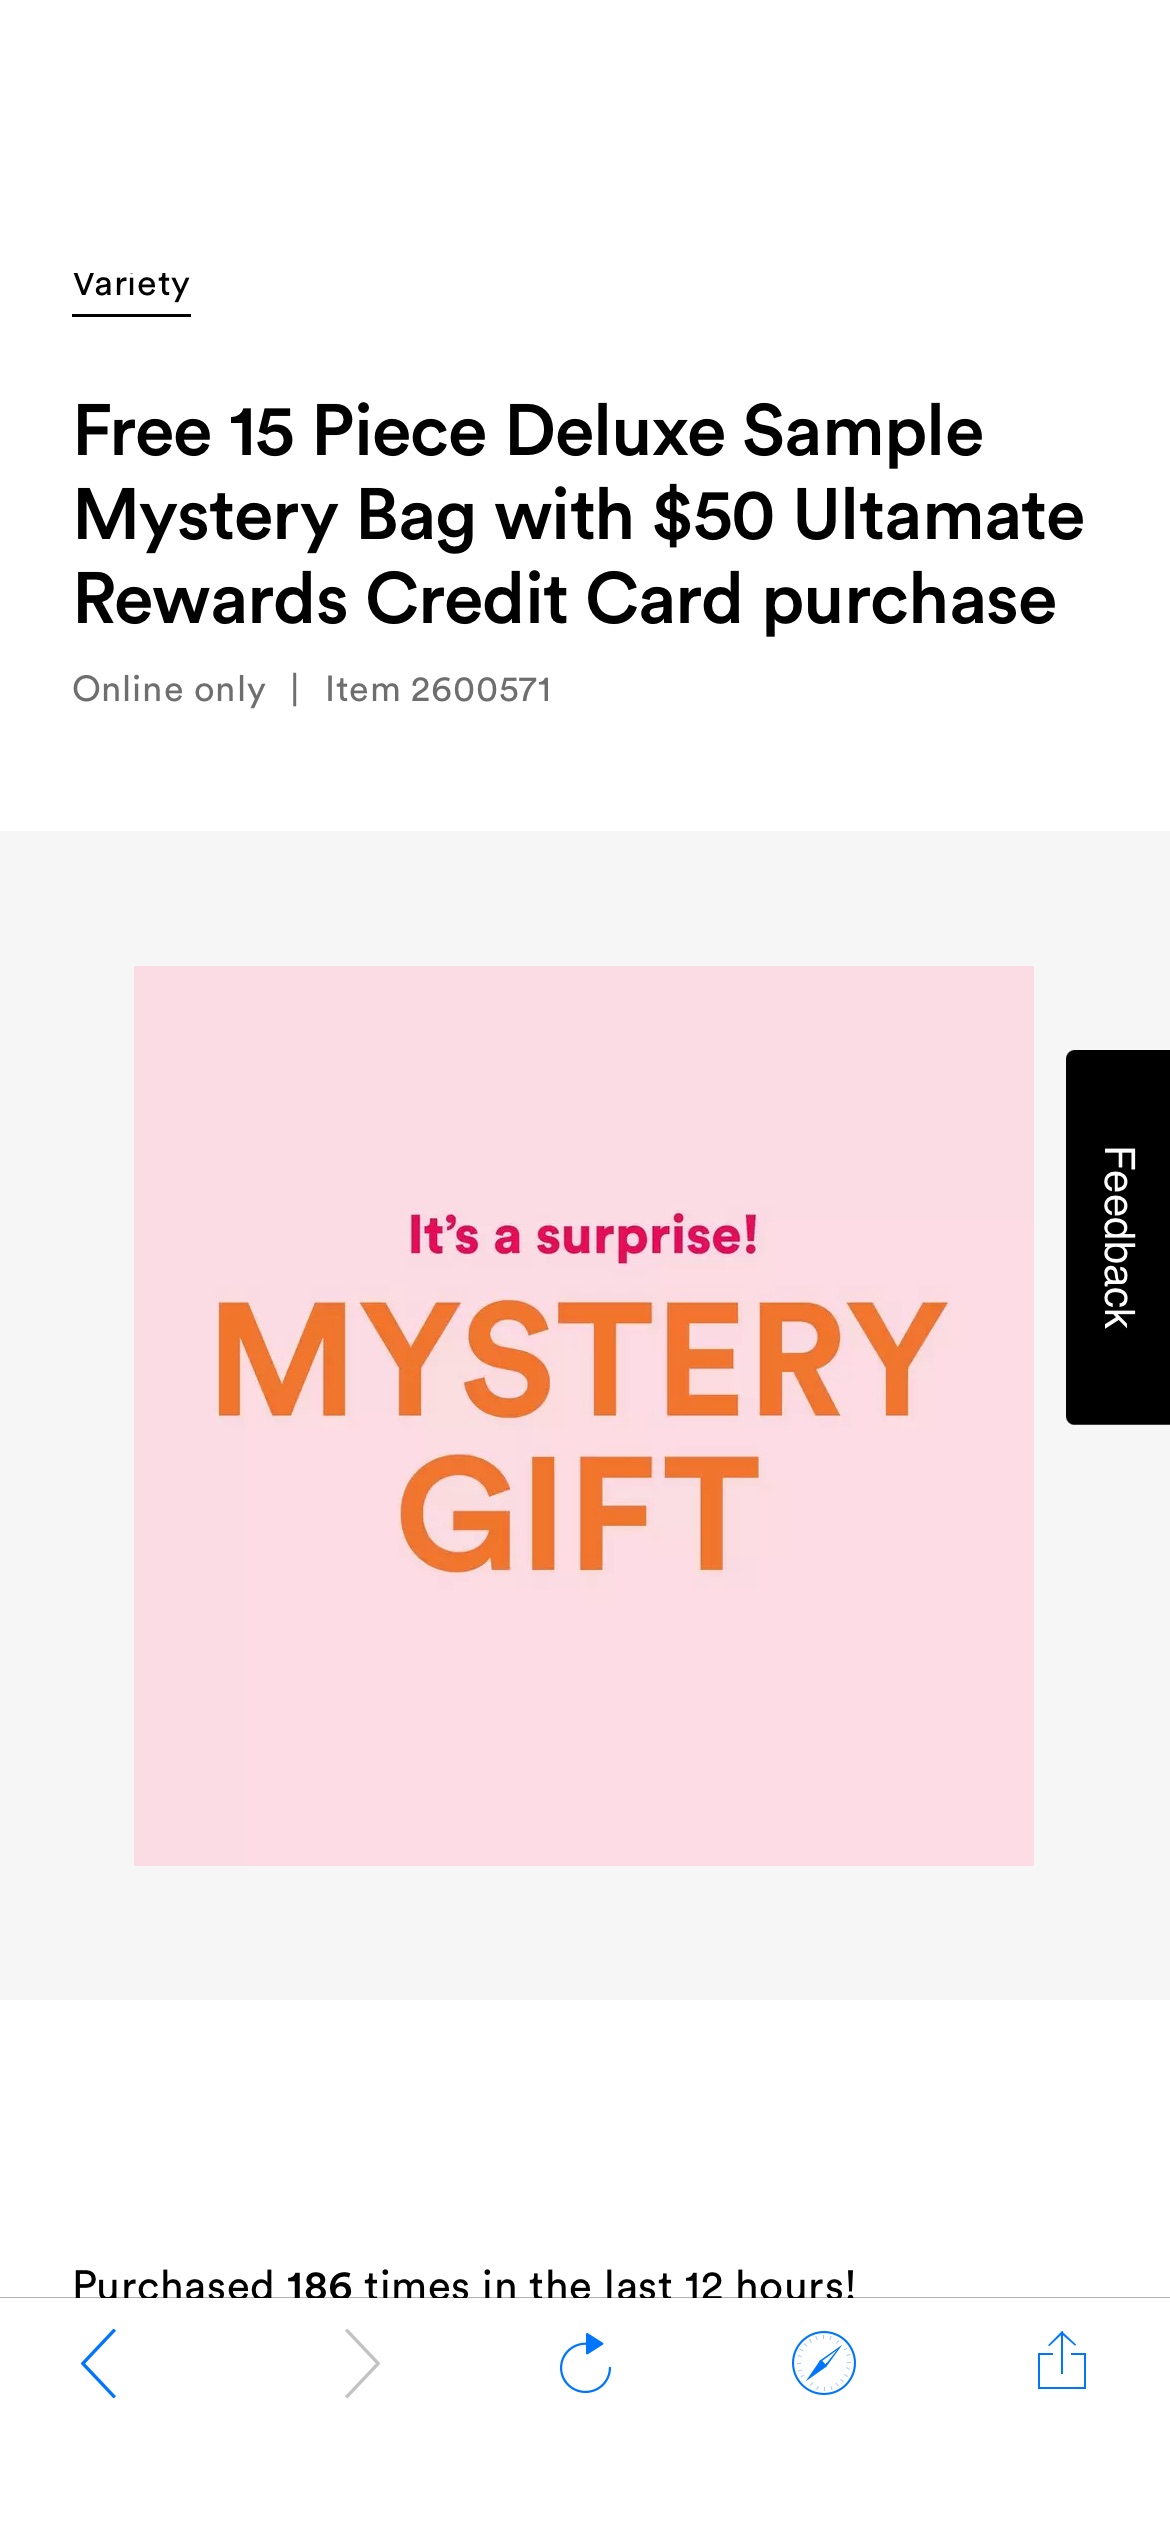 Free 15 Piece Deluxe Sample Mystery Bag with $50 Ultamate Rewards Credit Card purchase - Variety | Ulta Beauty